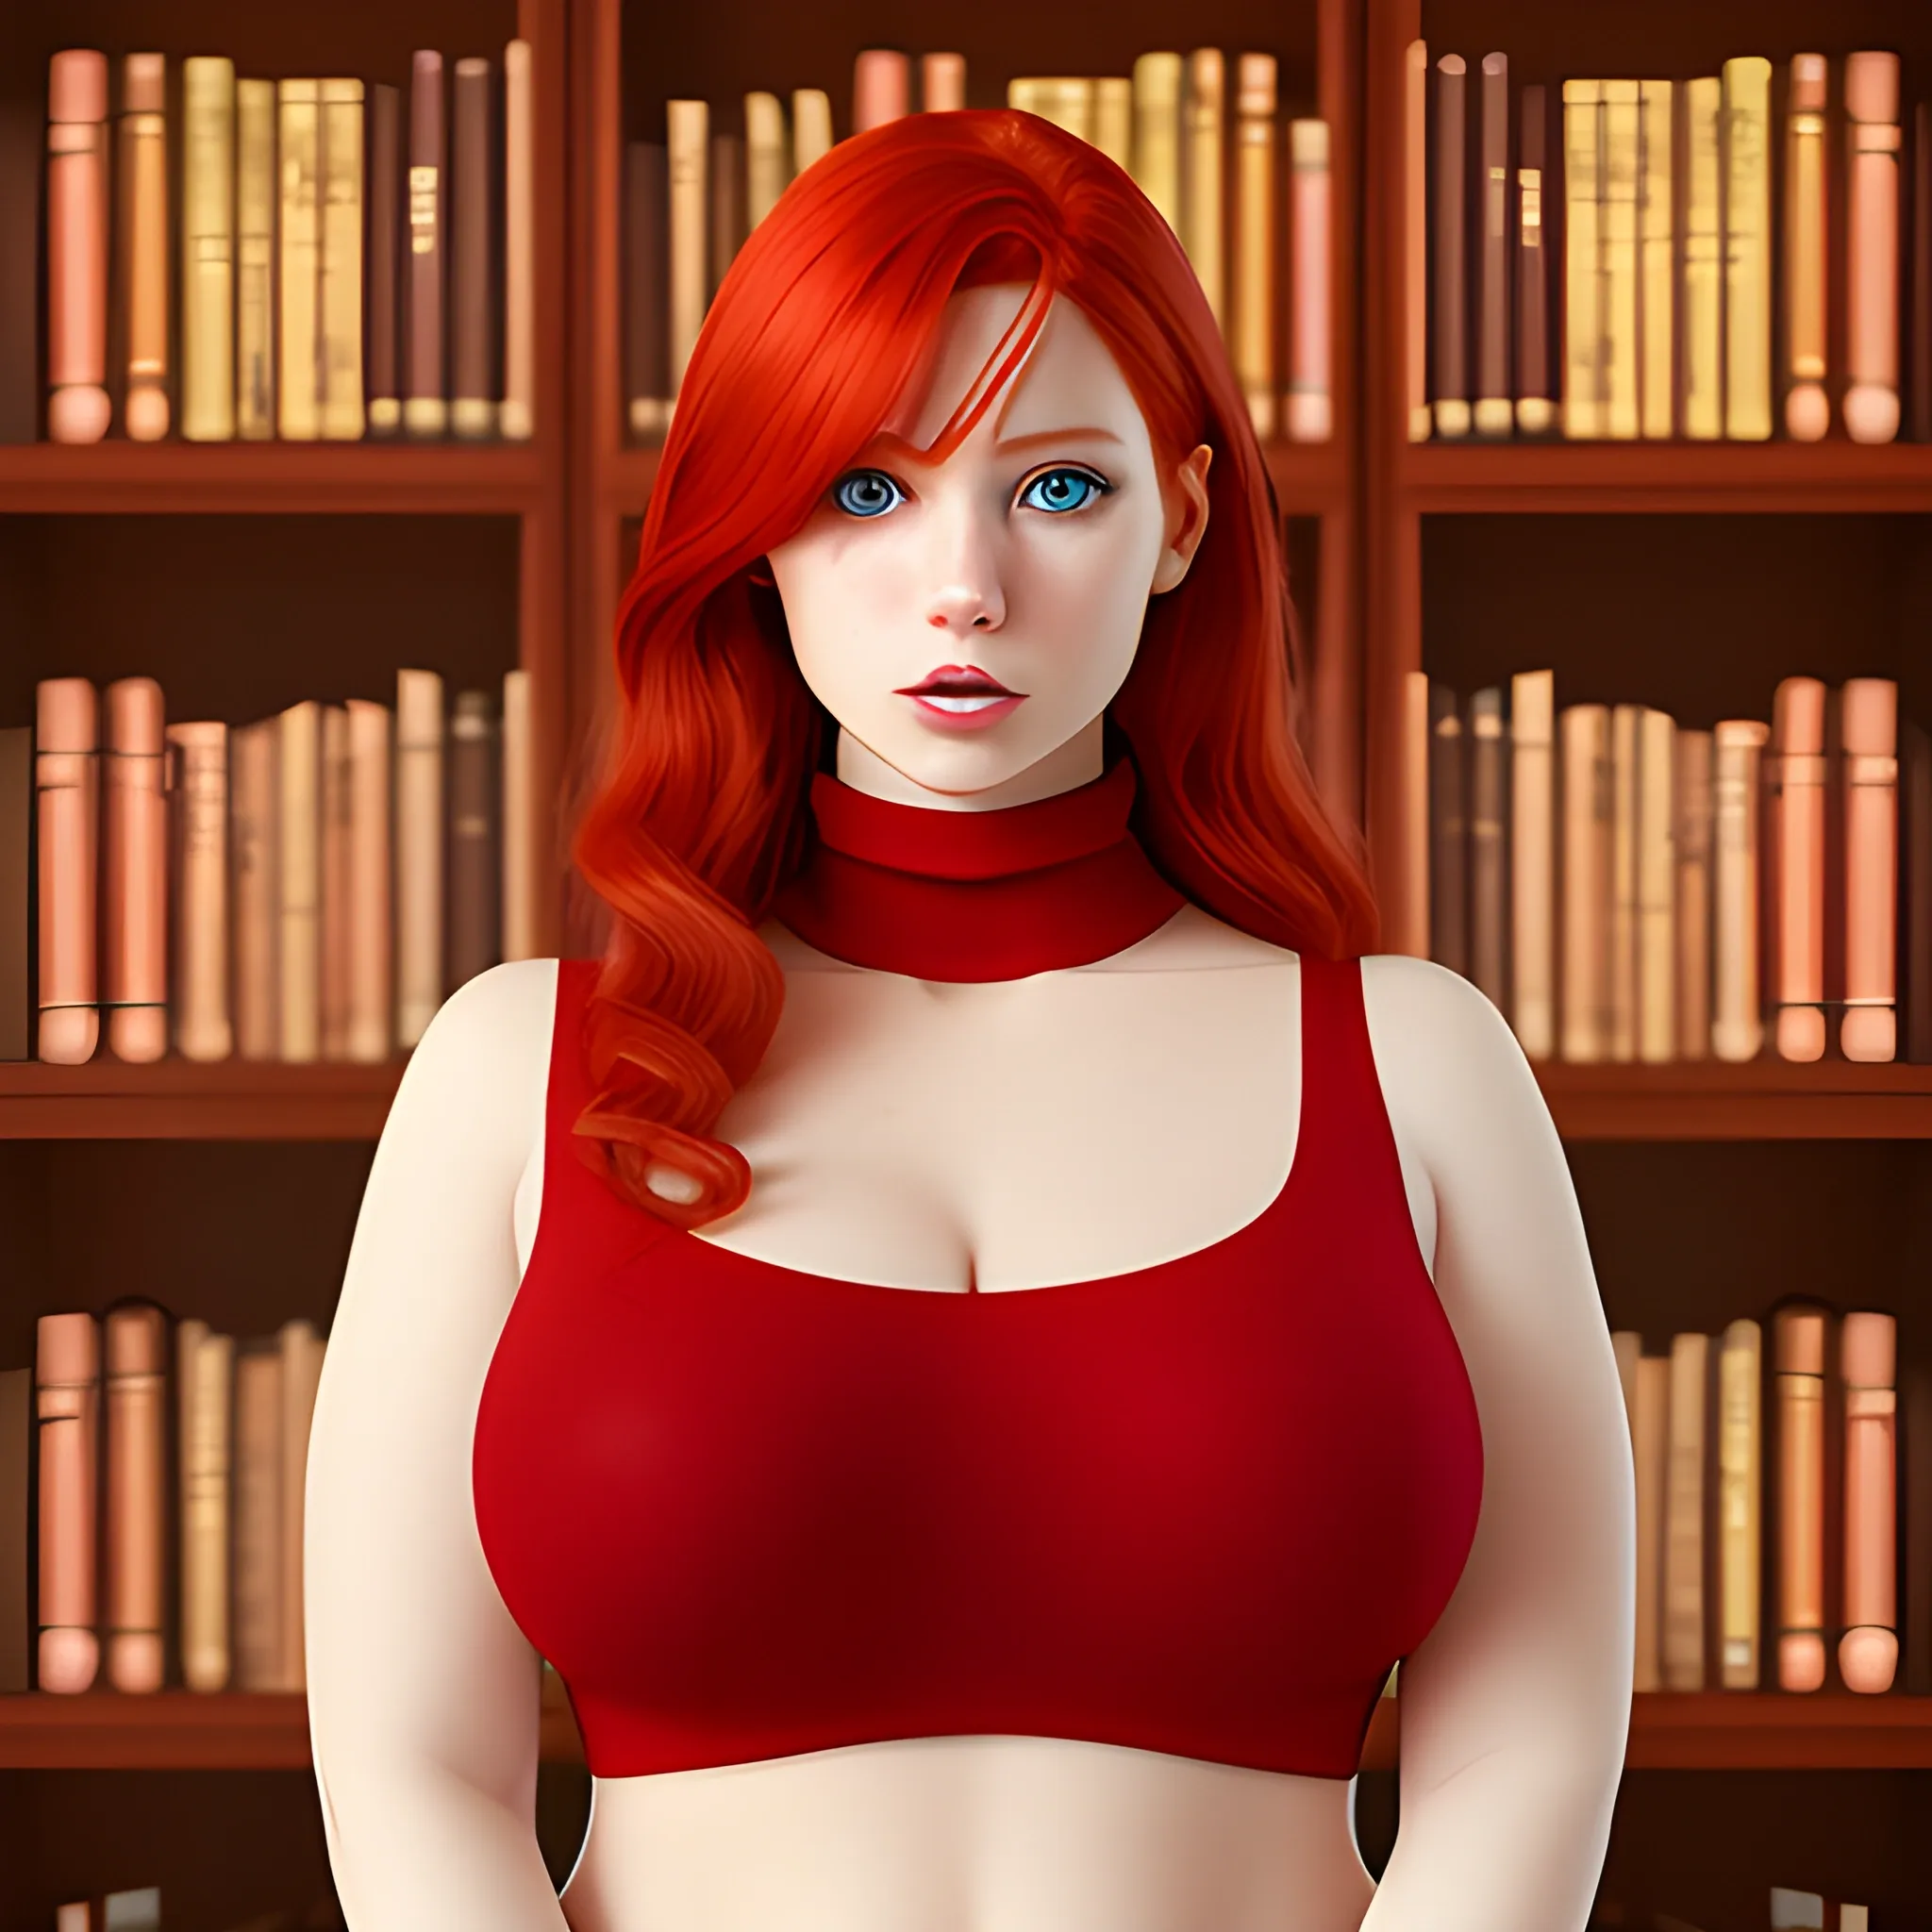 Create a photorealistic image of a red-haired female with voluptuous curves and a red turtleneck with a cutout in it's center, standing in a library. Pretty eyes, sexy mouth, whole body visible, lots of skin, maximum details